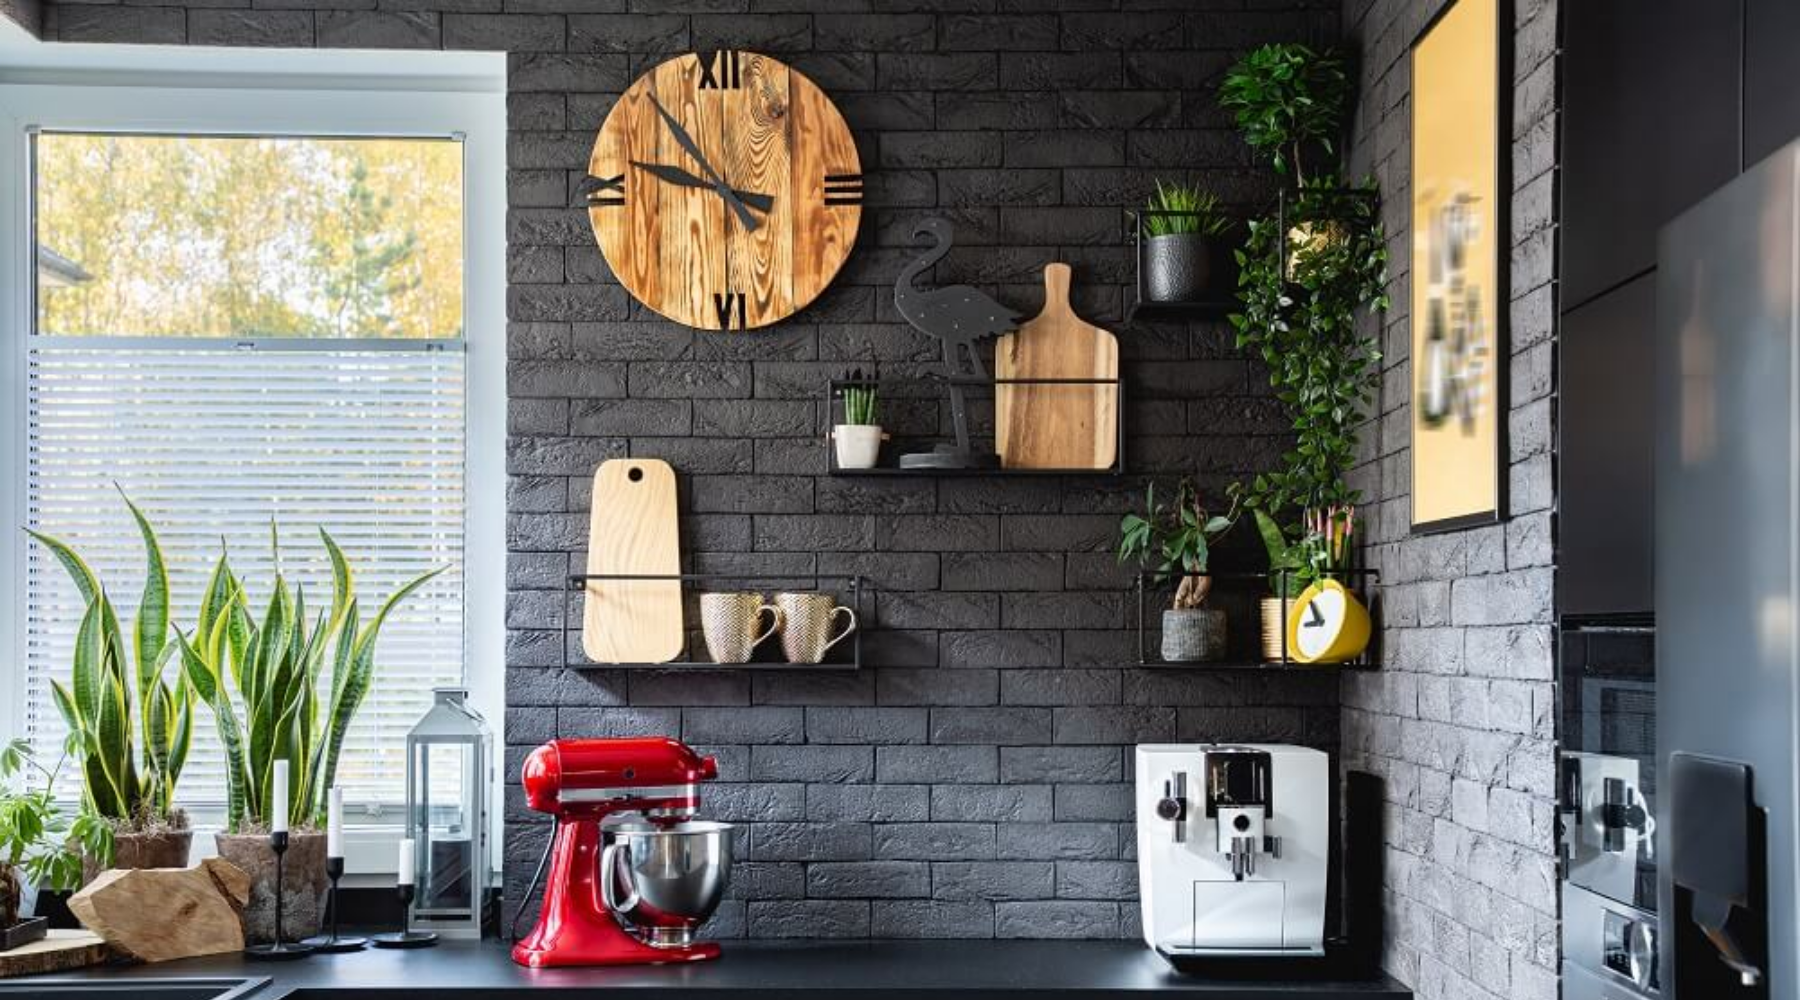 Various home appliances and kitchen decorations use the Brick Hanger to hold the items without the stress of drilling.